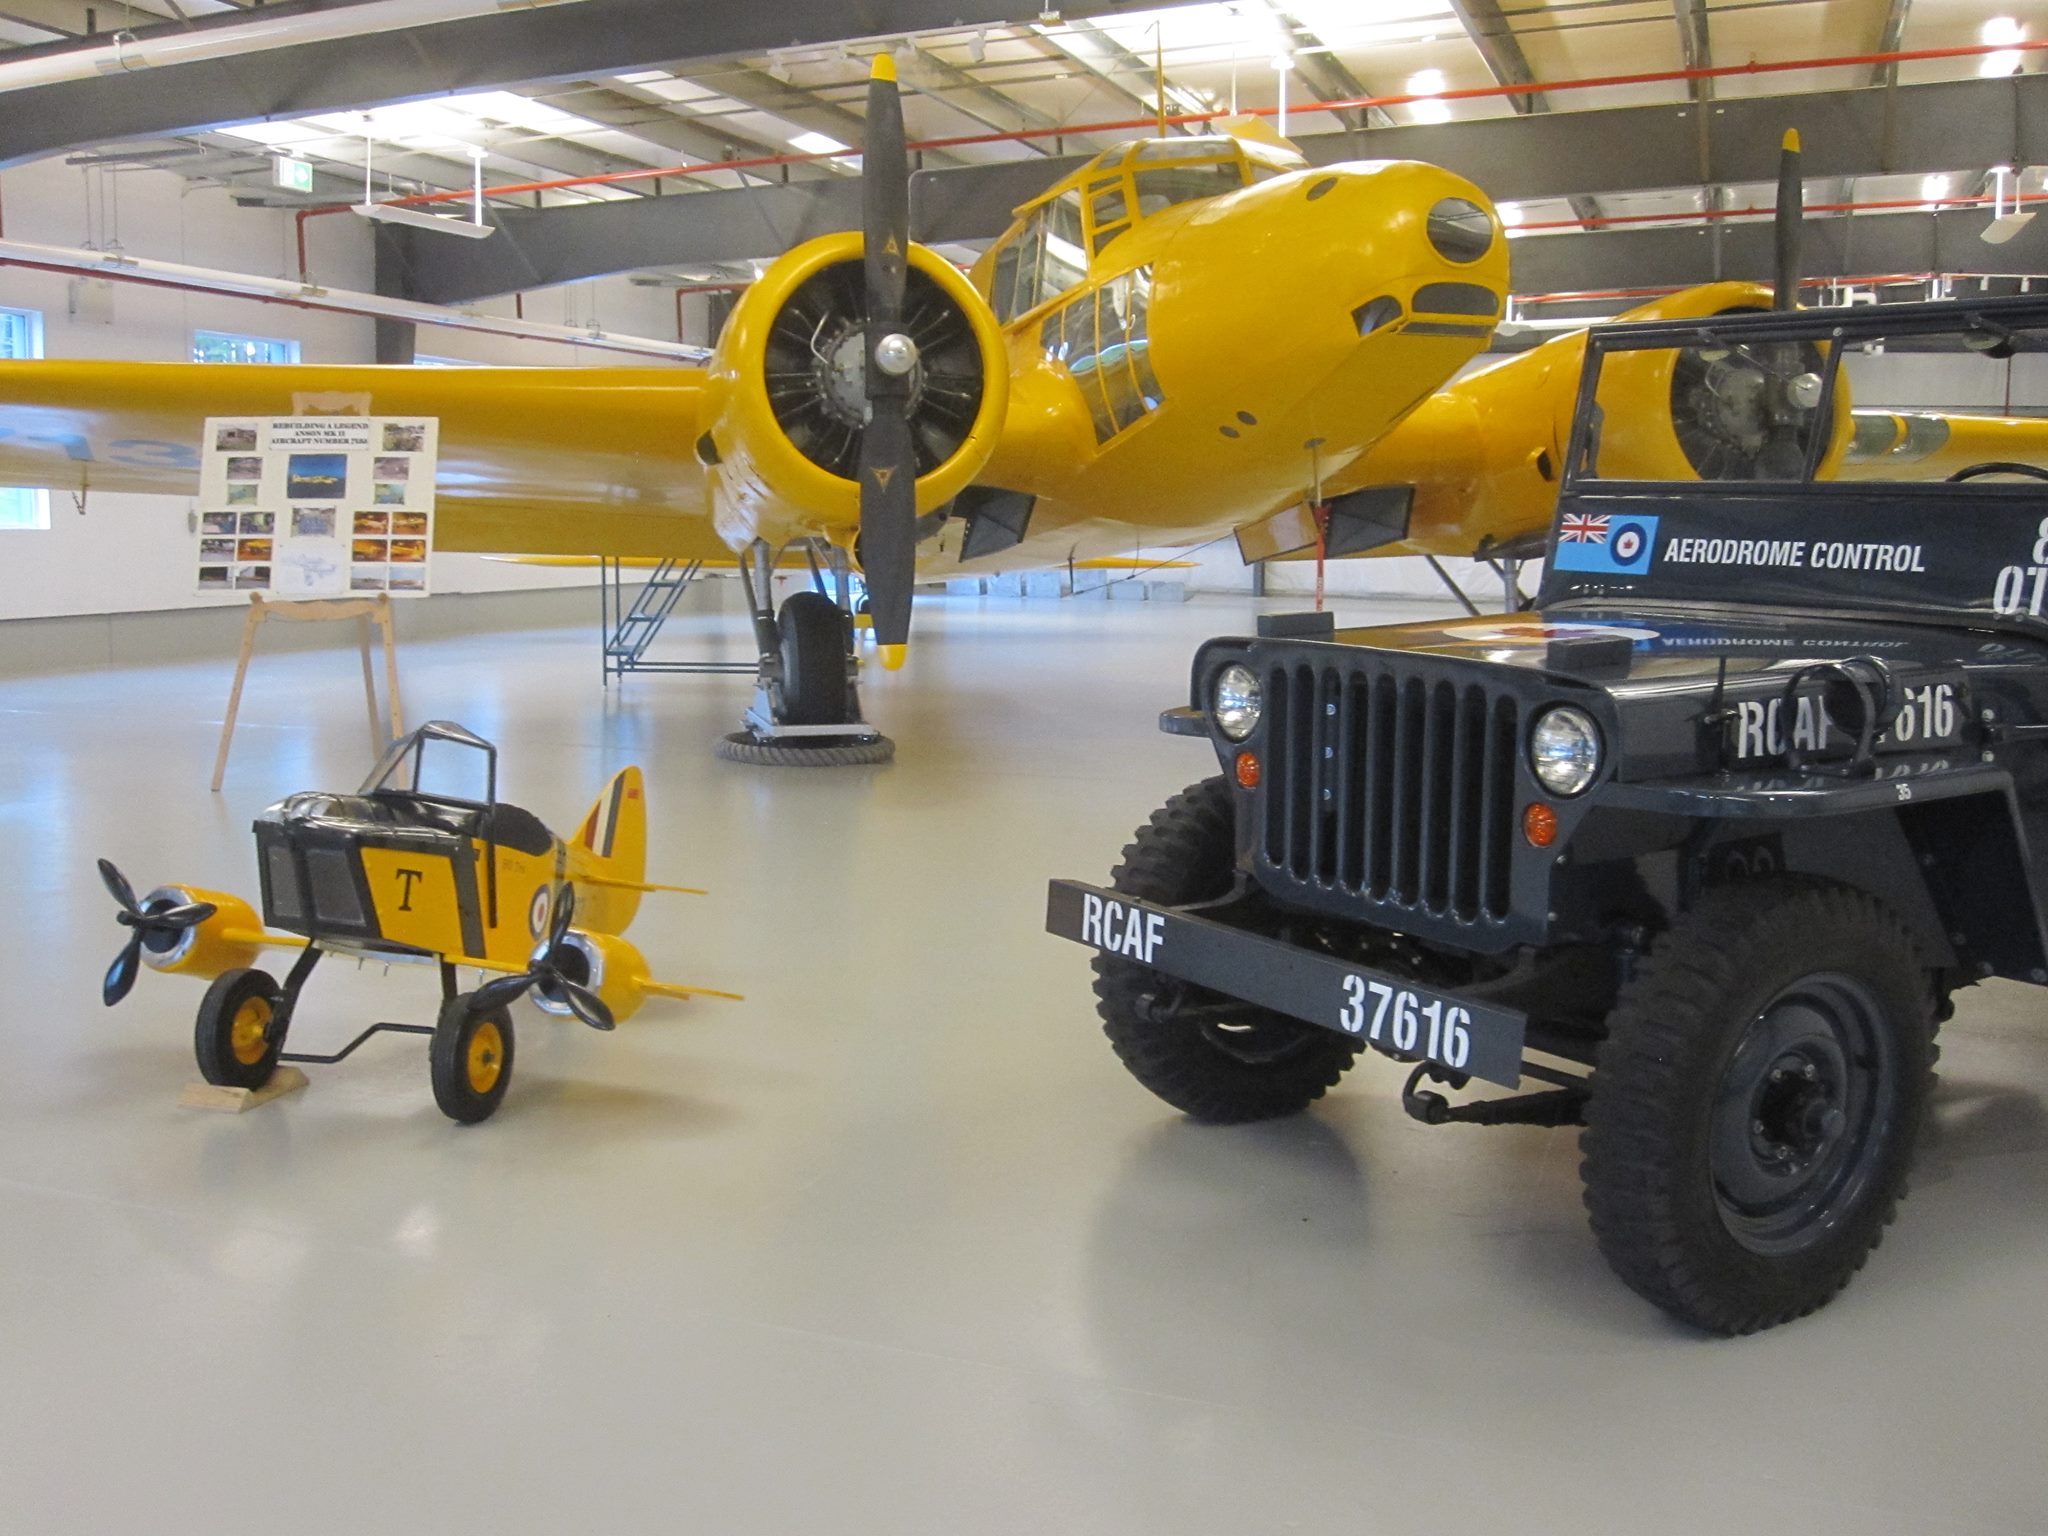 The recently restored Avro Anson and Willy's Jeep. (photo via GMAM)